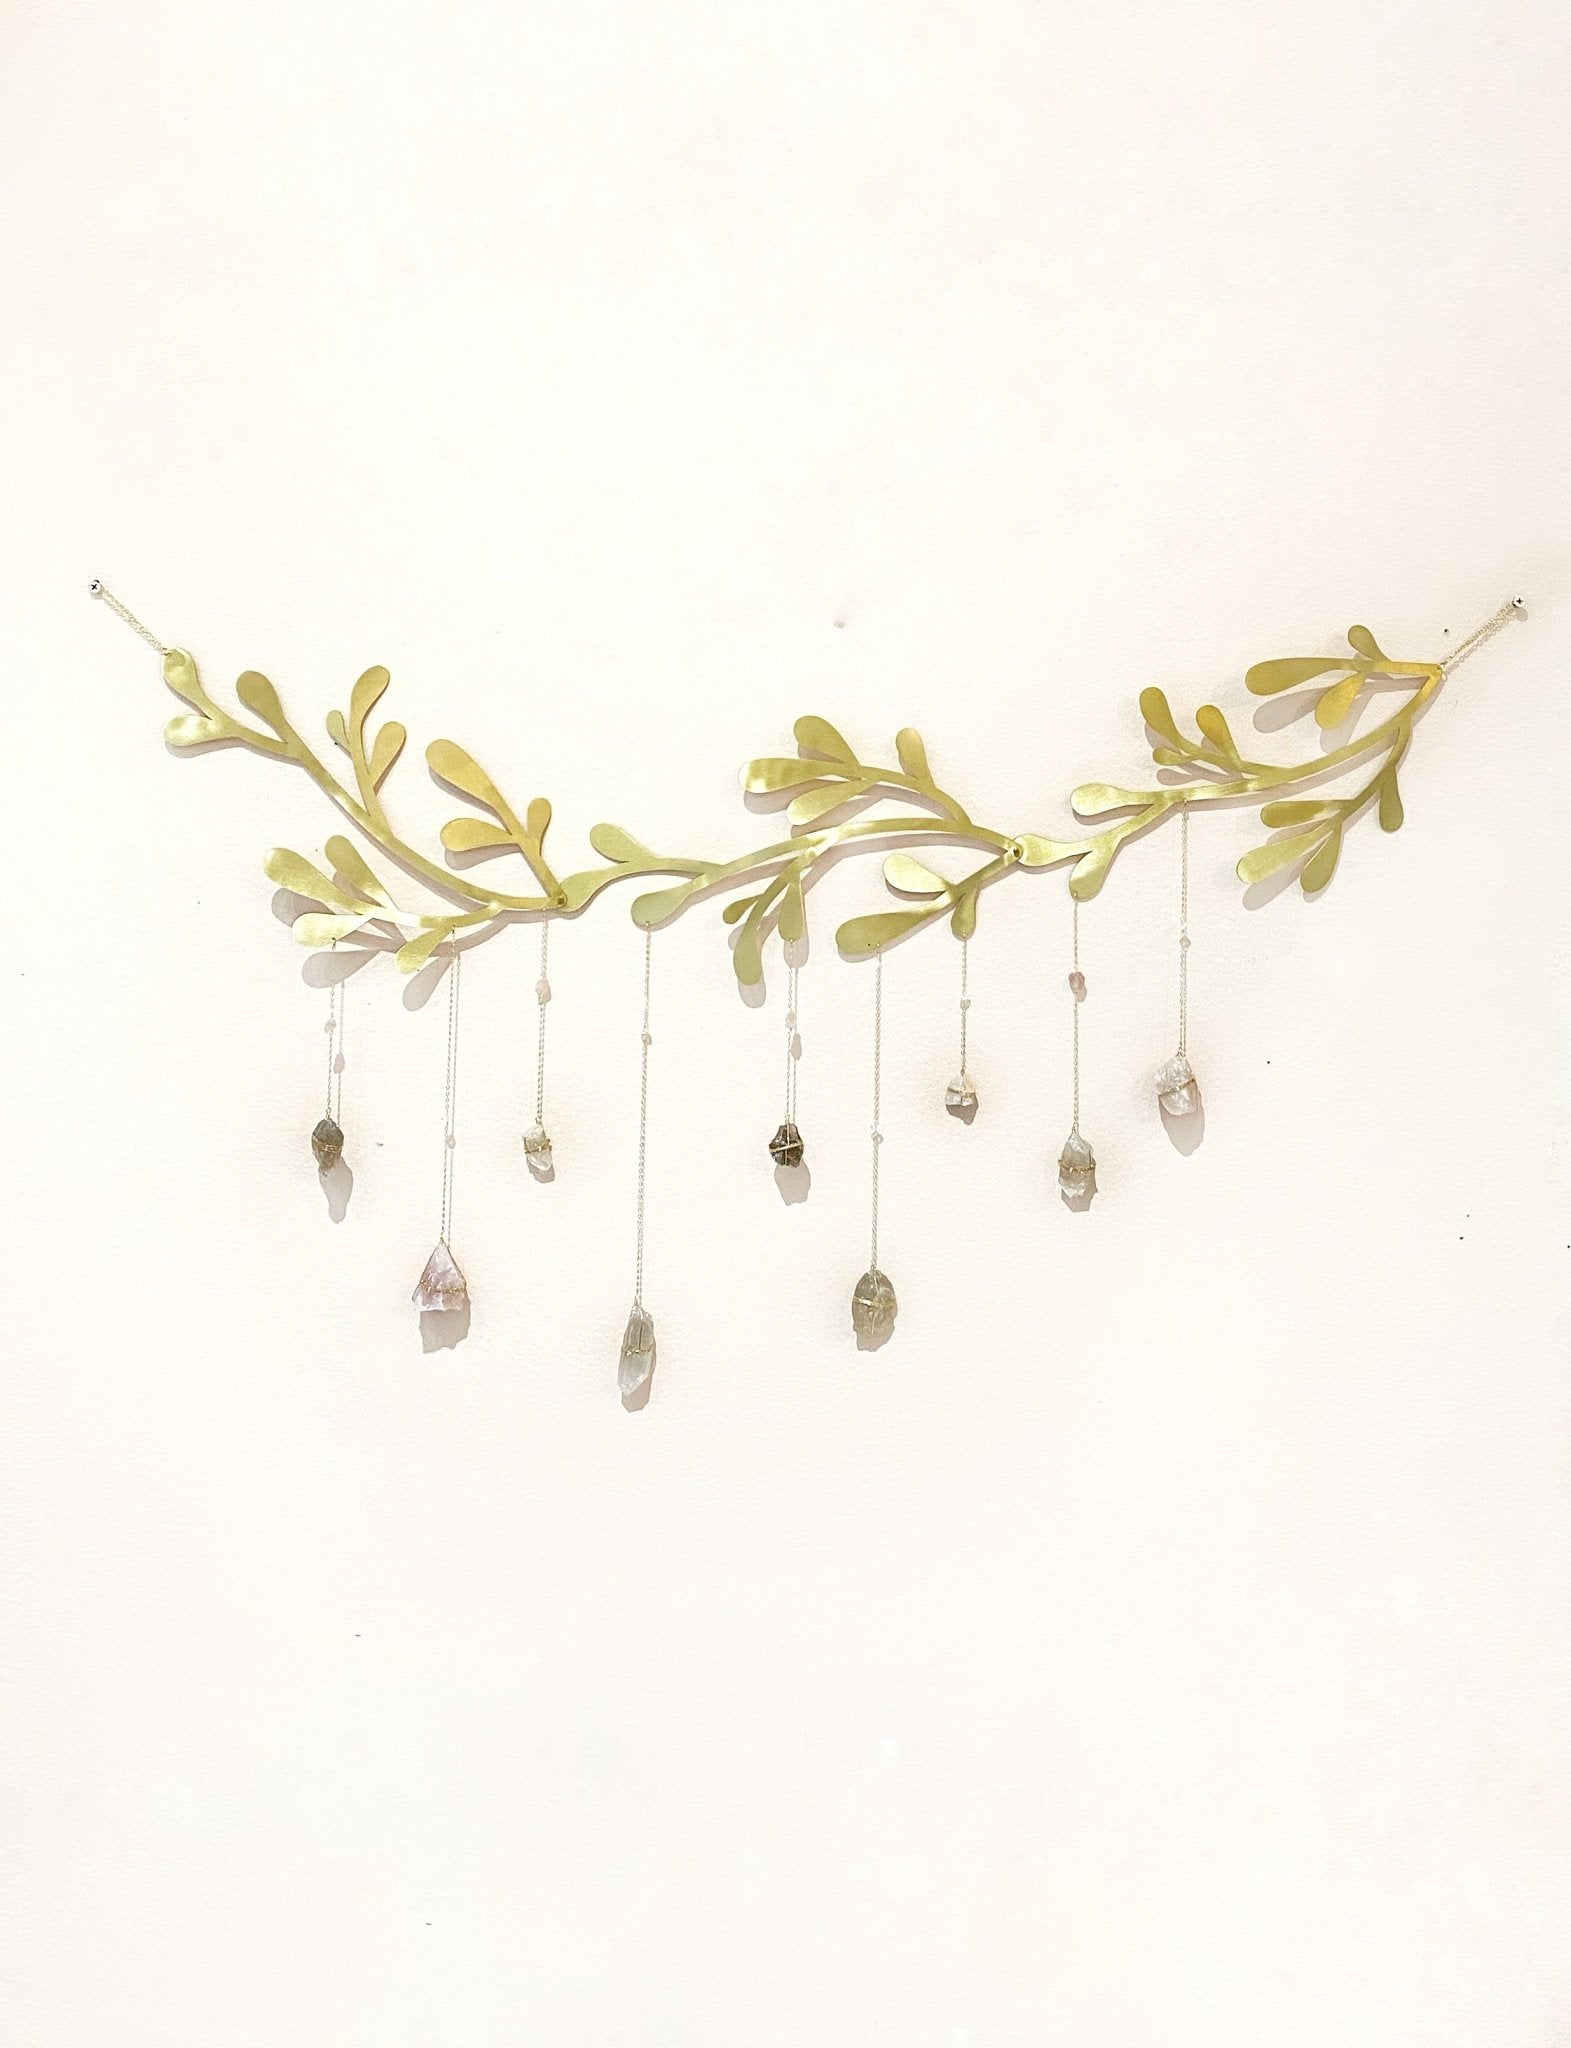 Floral Vines Healing Crystal Garland - Ariana Ost